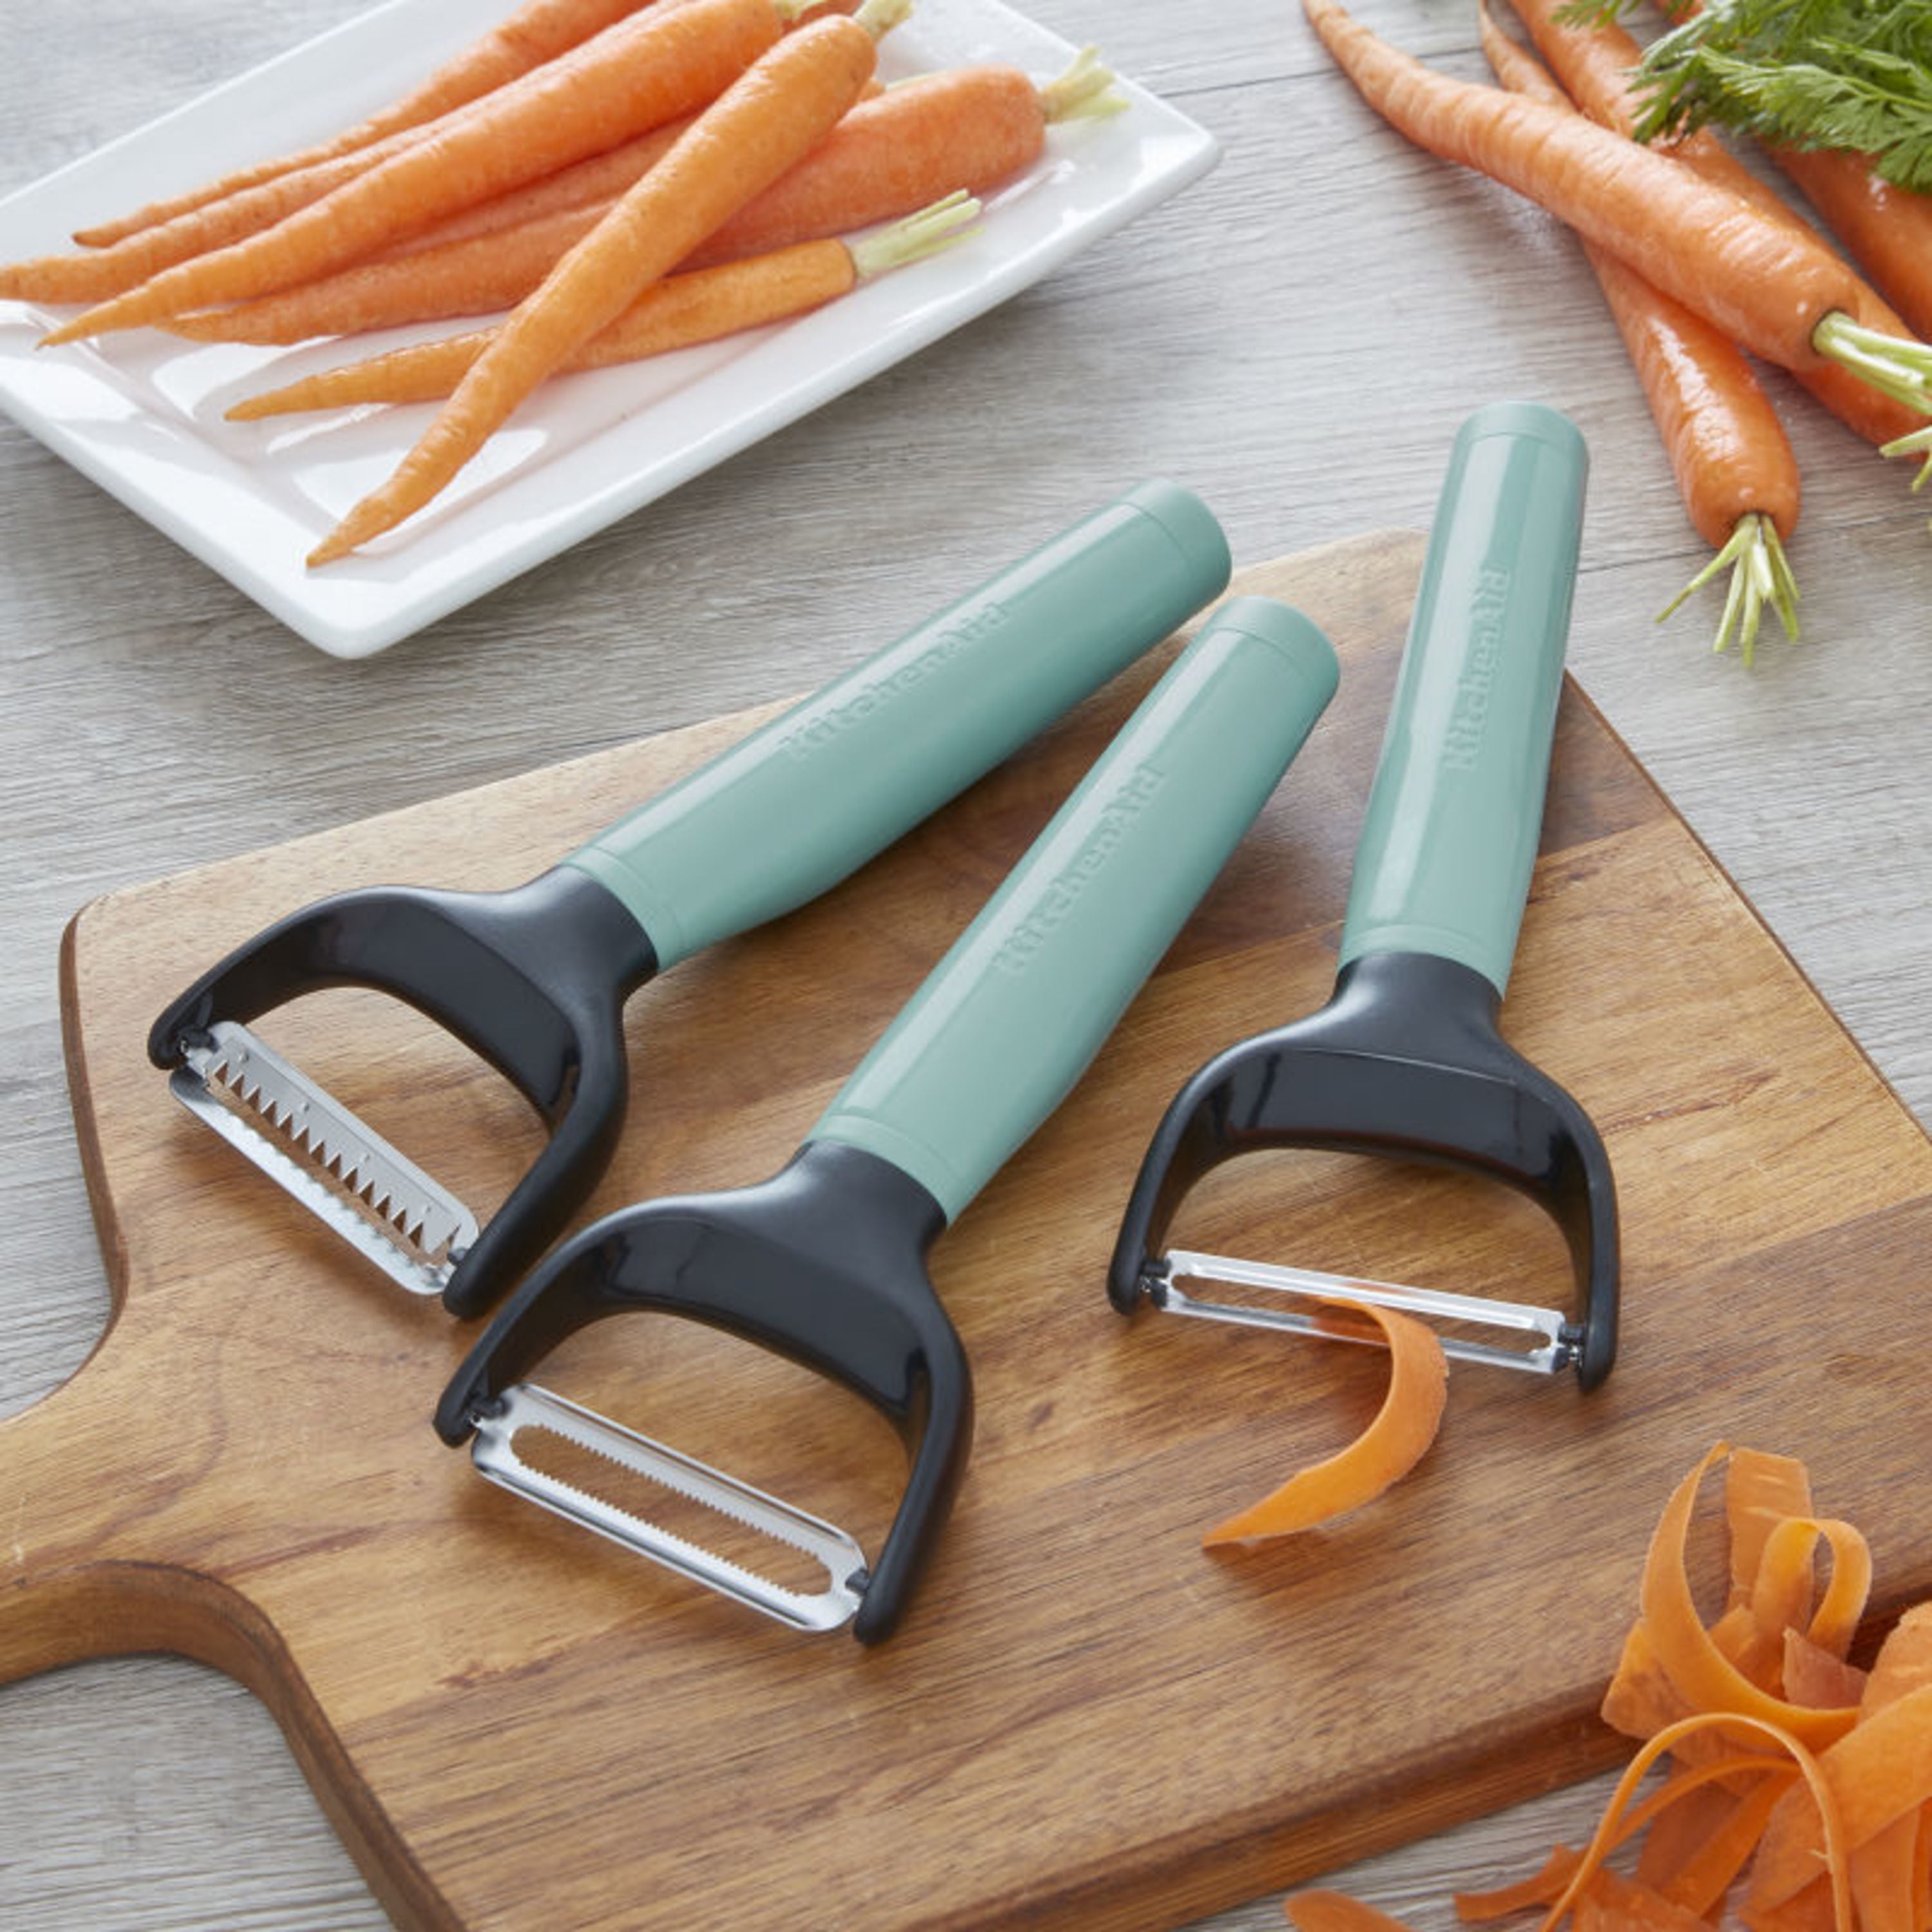 Kitchenaid Universal 3-piece Peeler Set in Assorted Colors 